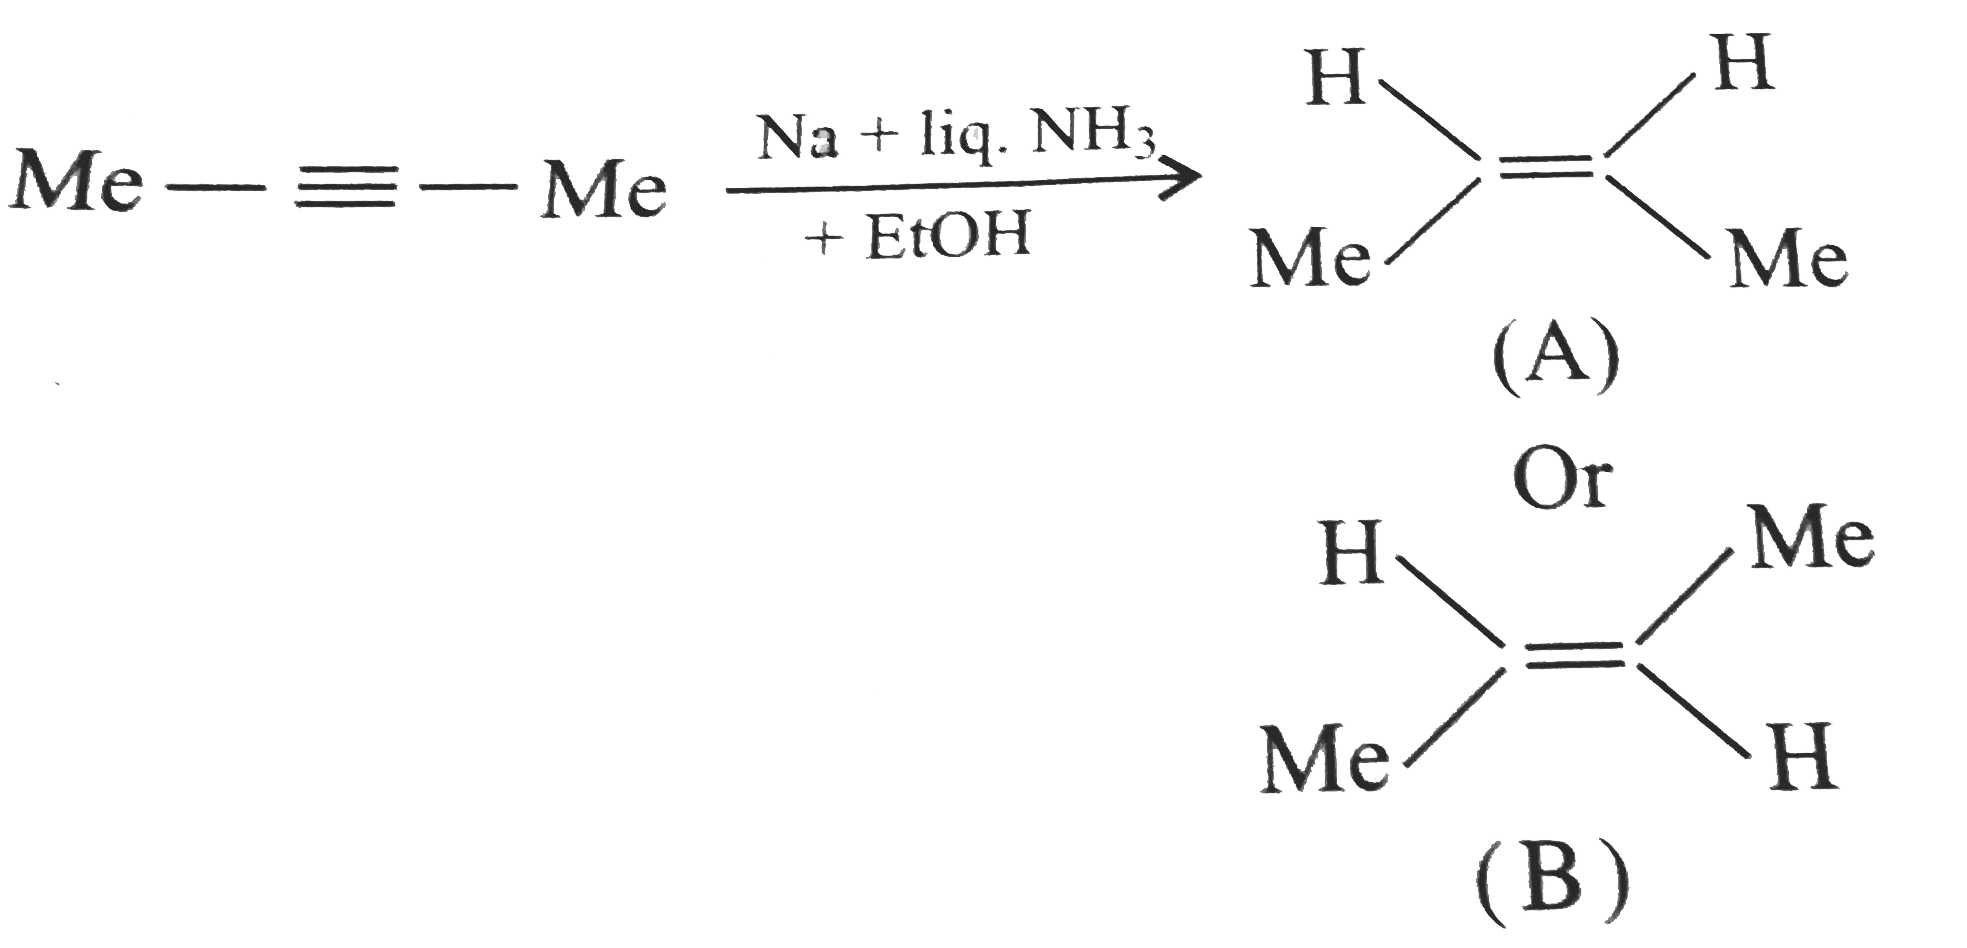 Statement 1: The product formed is (B).   Statement 2: The reaction proceeds via the formation of the following species in the order: Radical anion rarr Vinylic anion rarr Vinylic redical rarr  Product